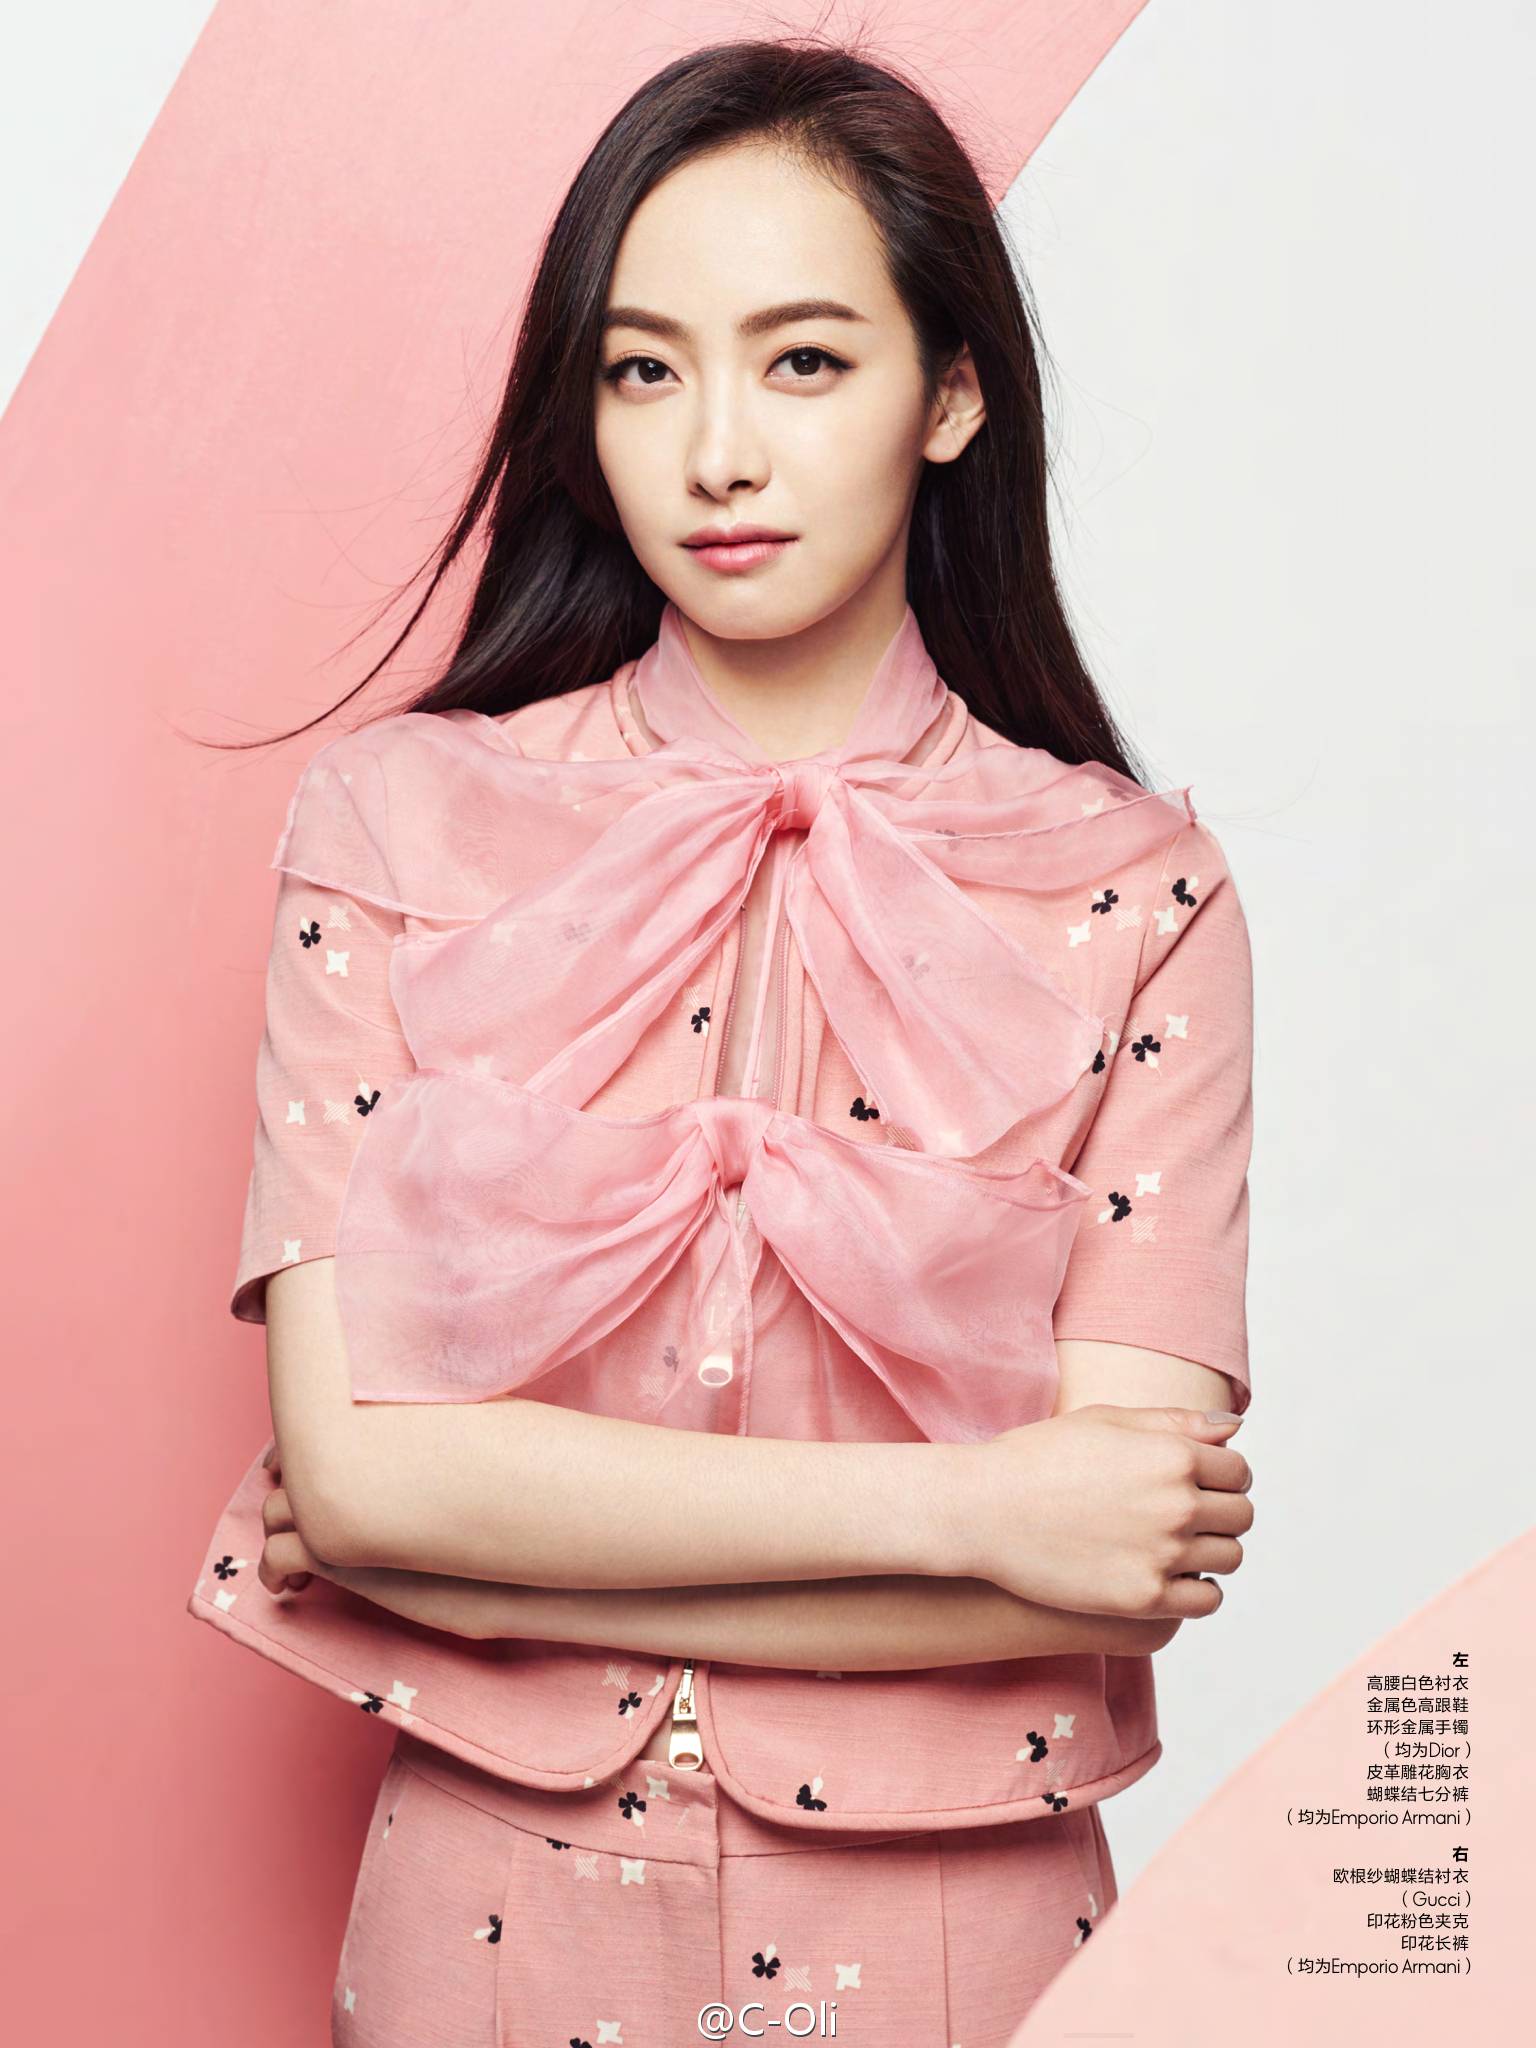 Victoria Song, Android IPhone Wallpaper. KPOP JPOP Image Board